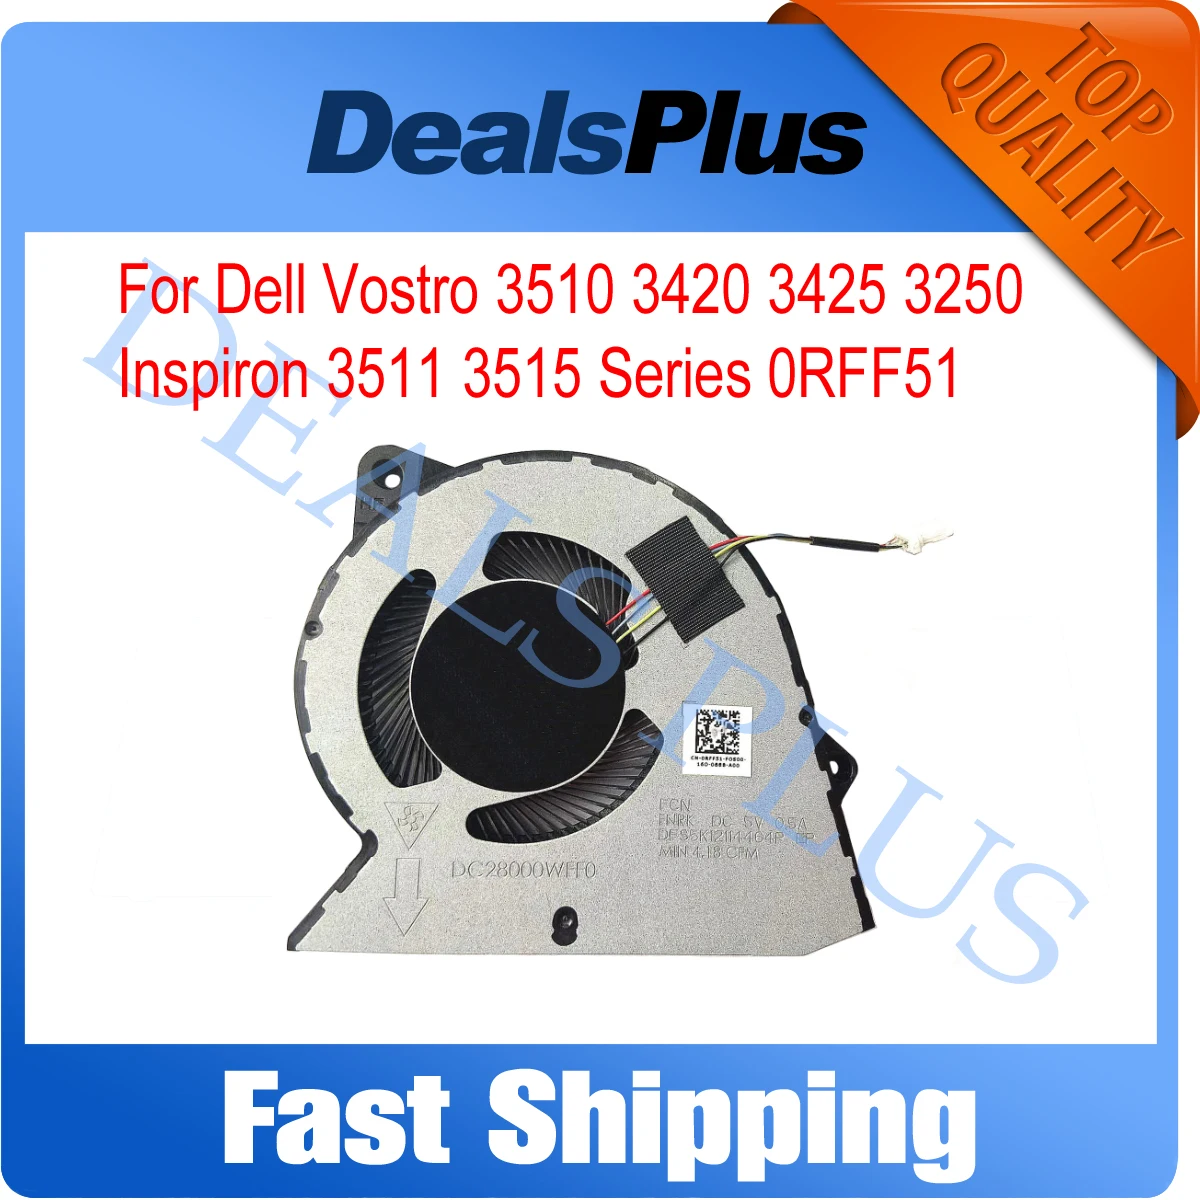 

New Laptop CPU Cooling Fan Replacement For Dell Vostro 3510 3420 3425 3250 Inspiron 3511 3515 Series 0RFF51